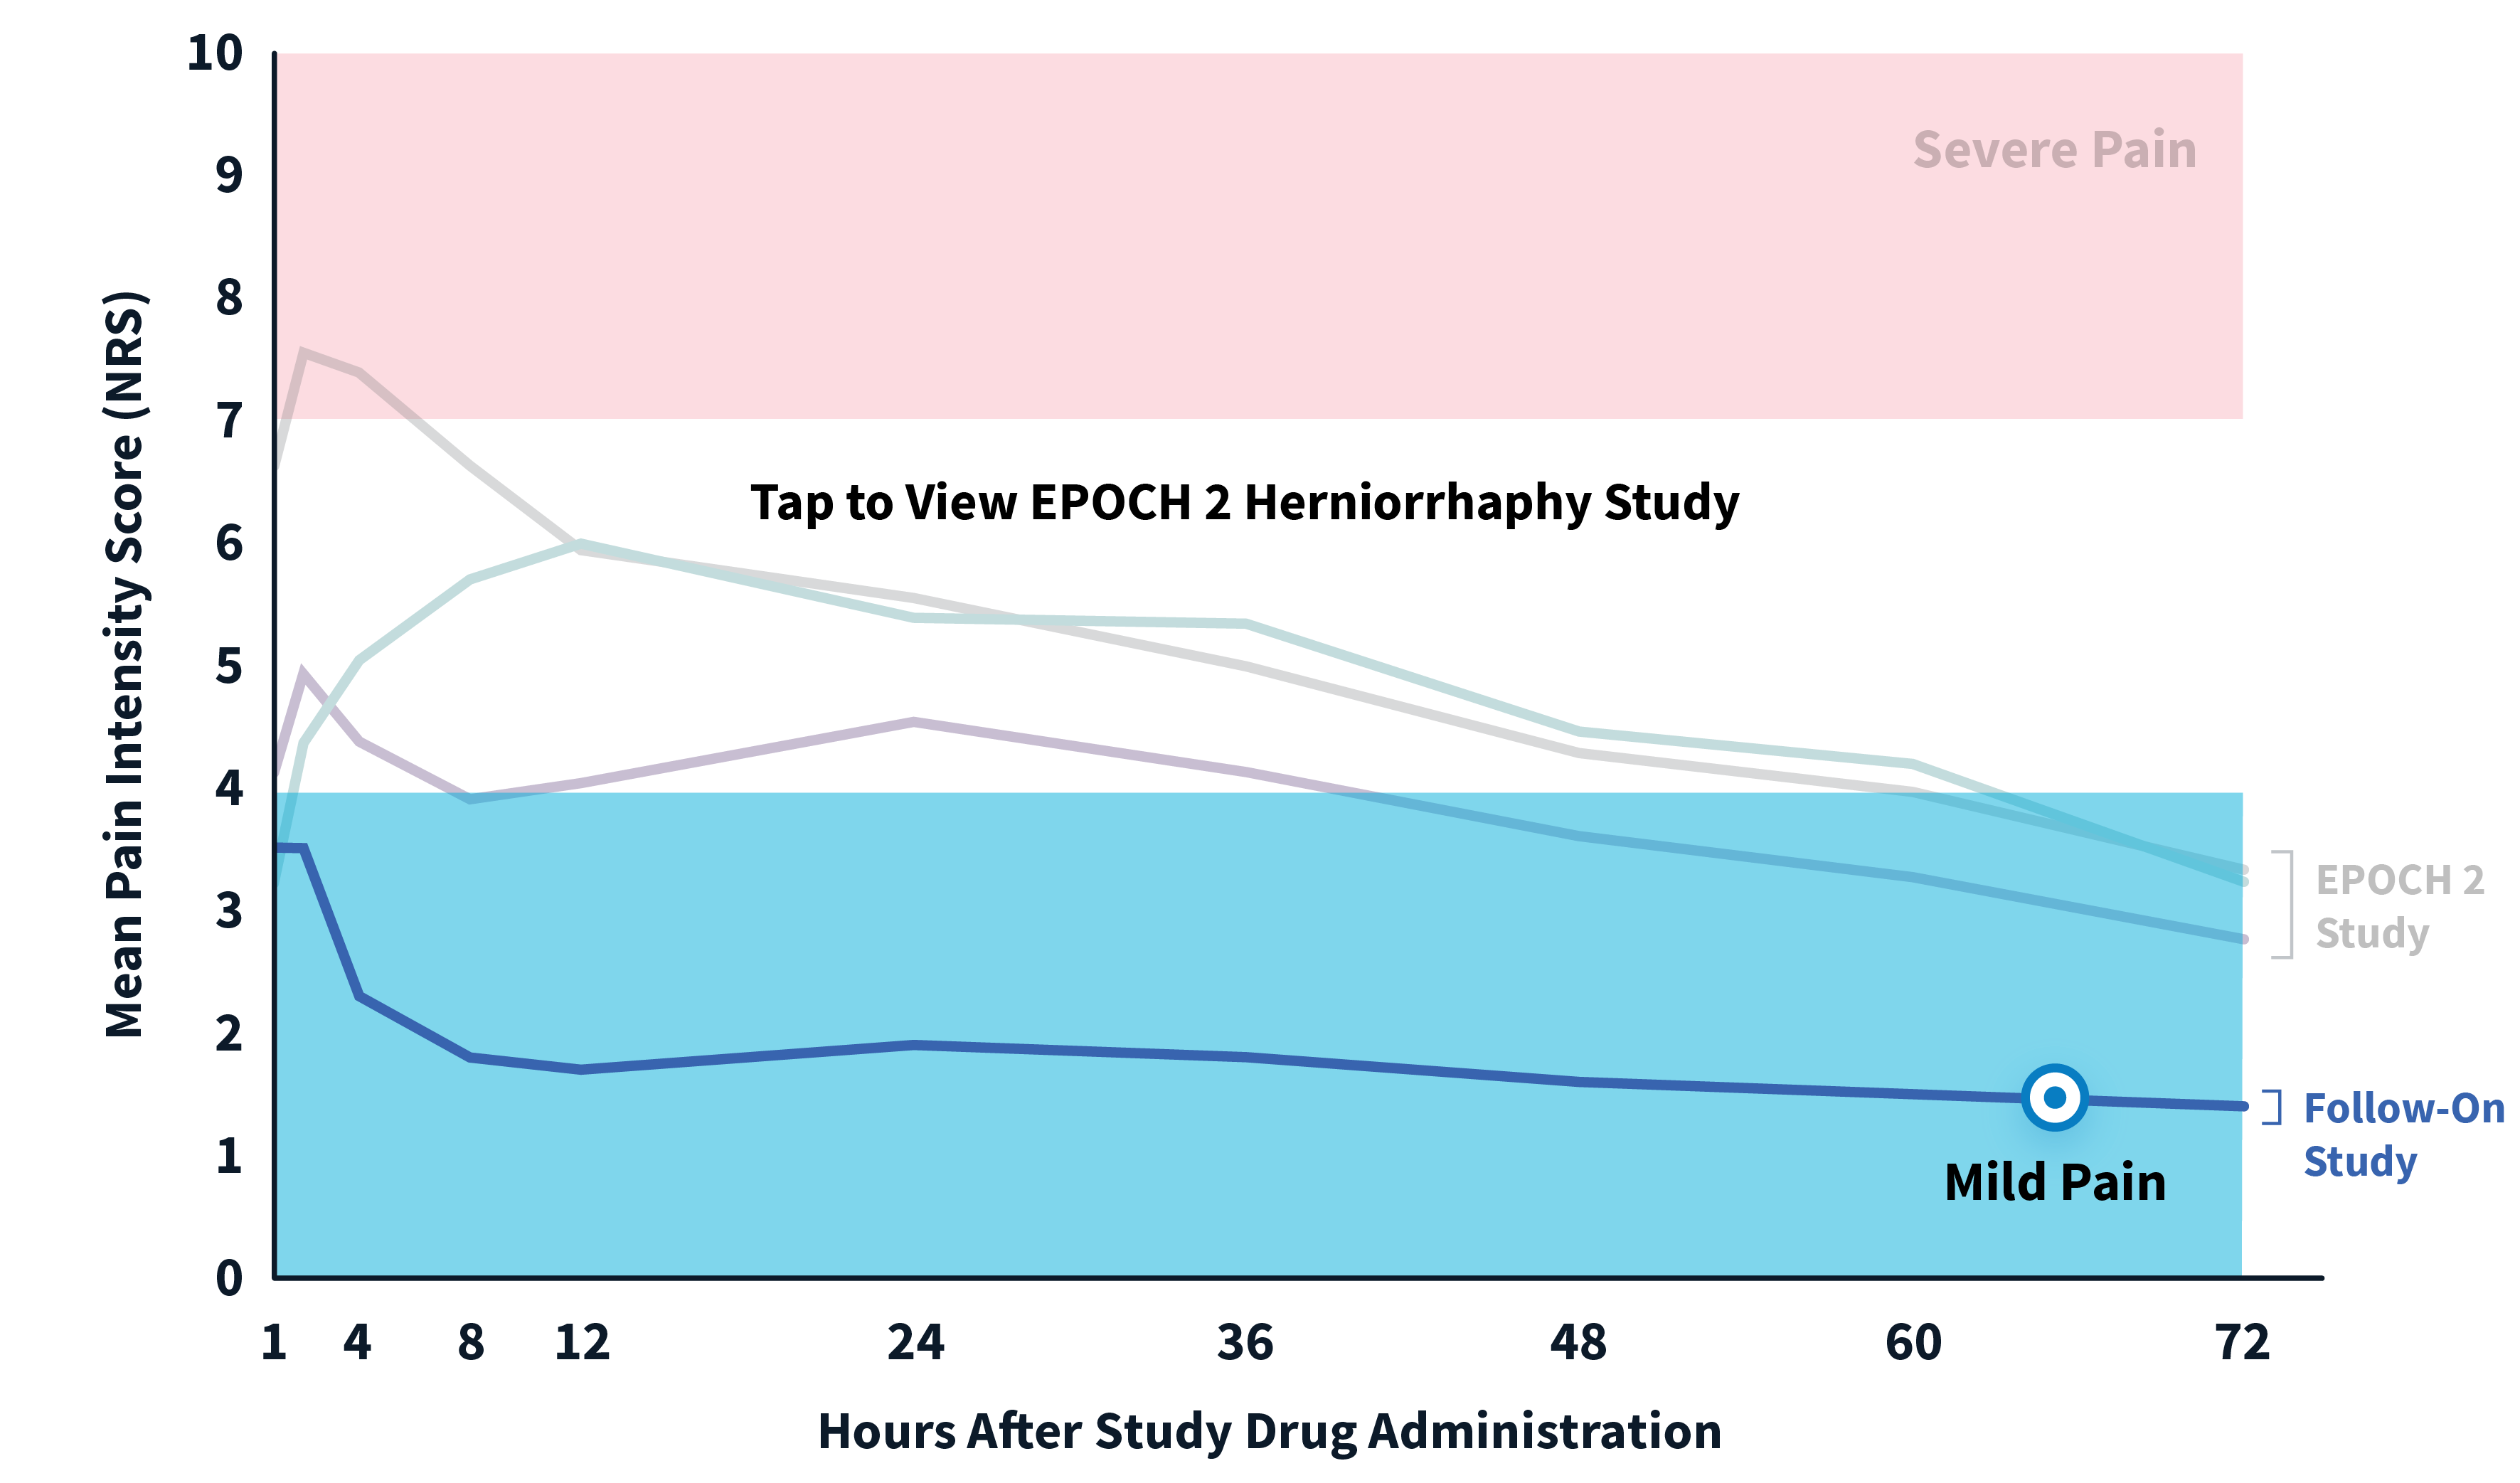 Graph: EPOCH 2 Herniorrhaphy: 72 hours of pain relief.